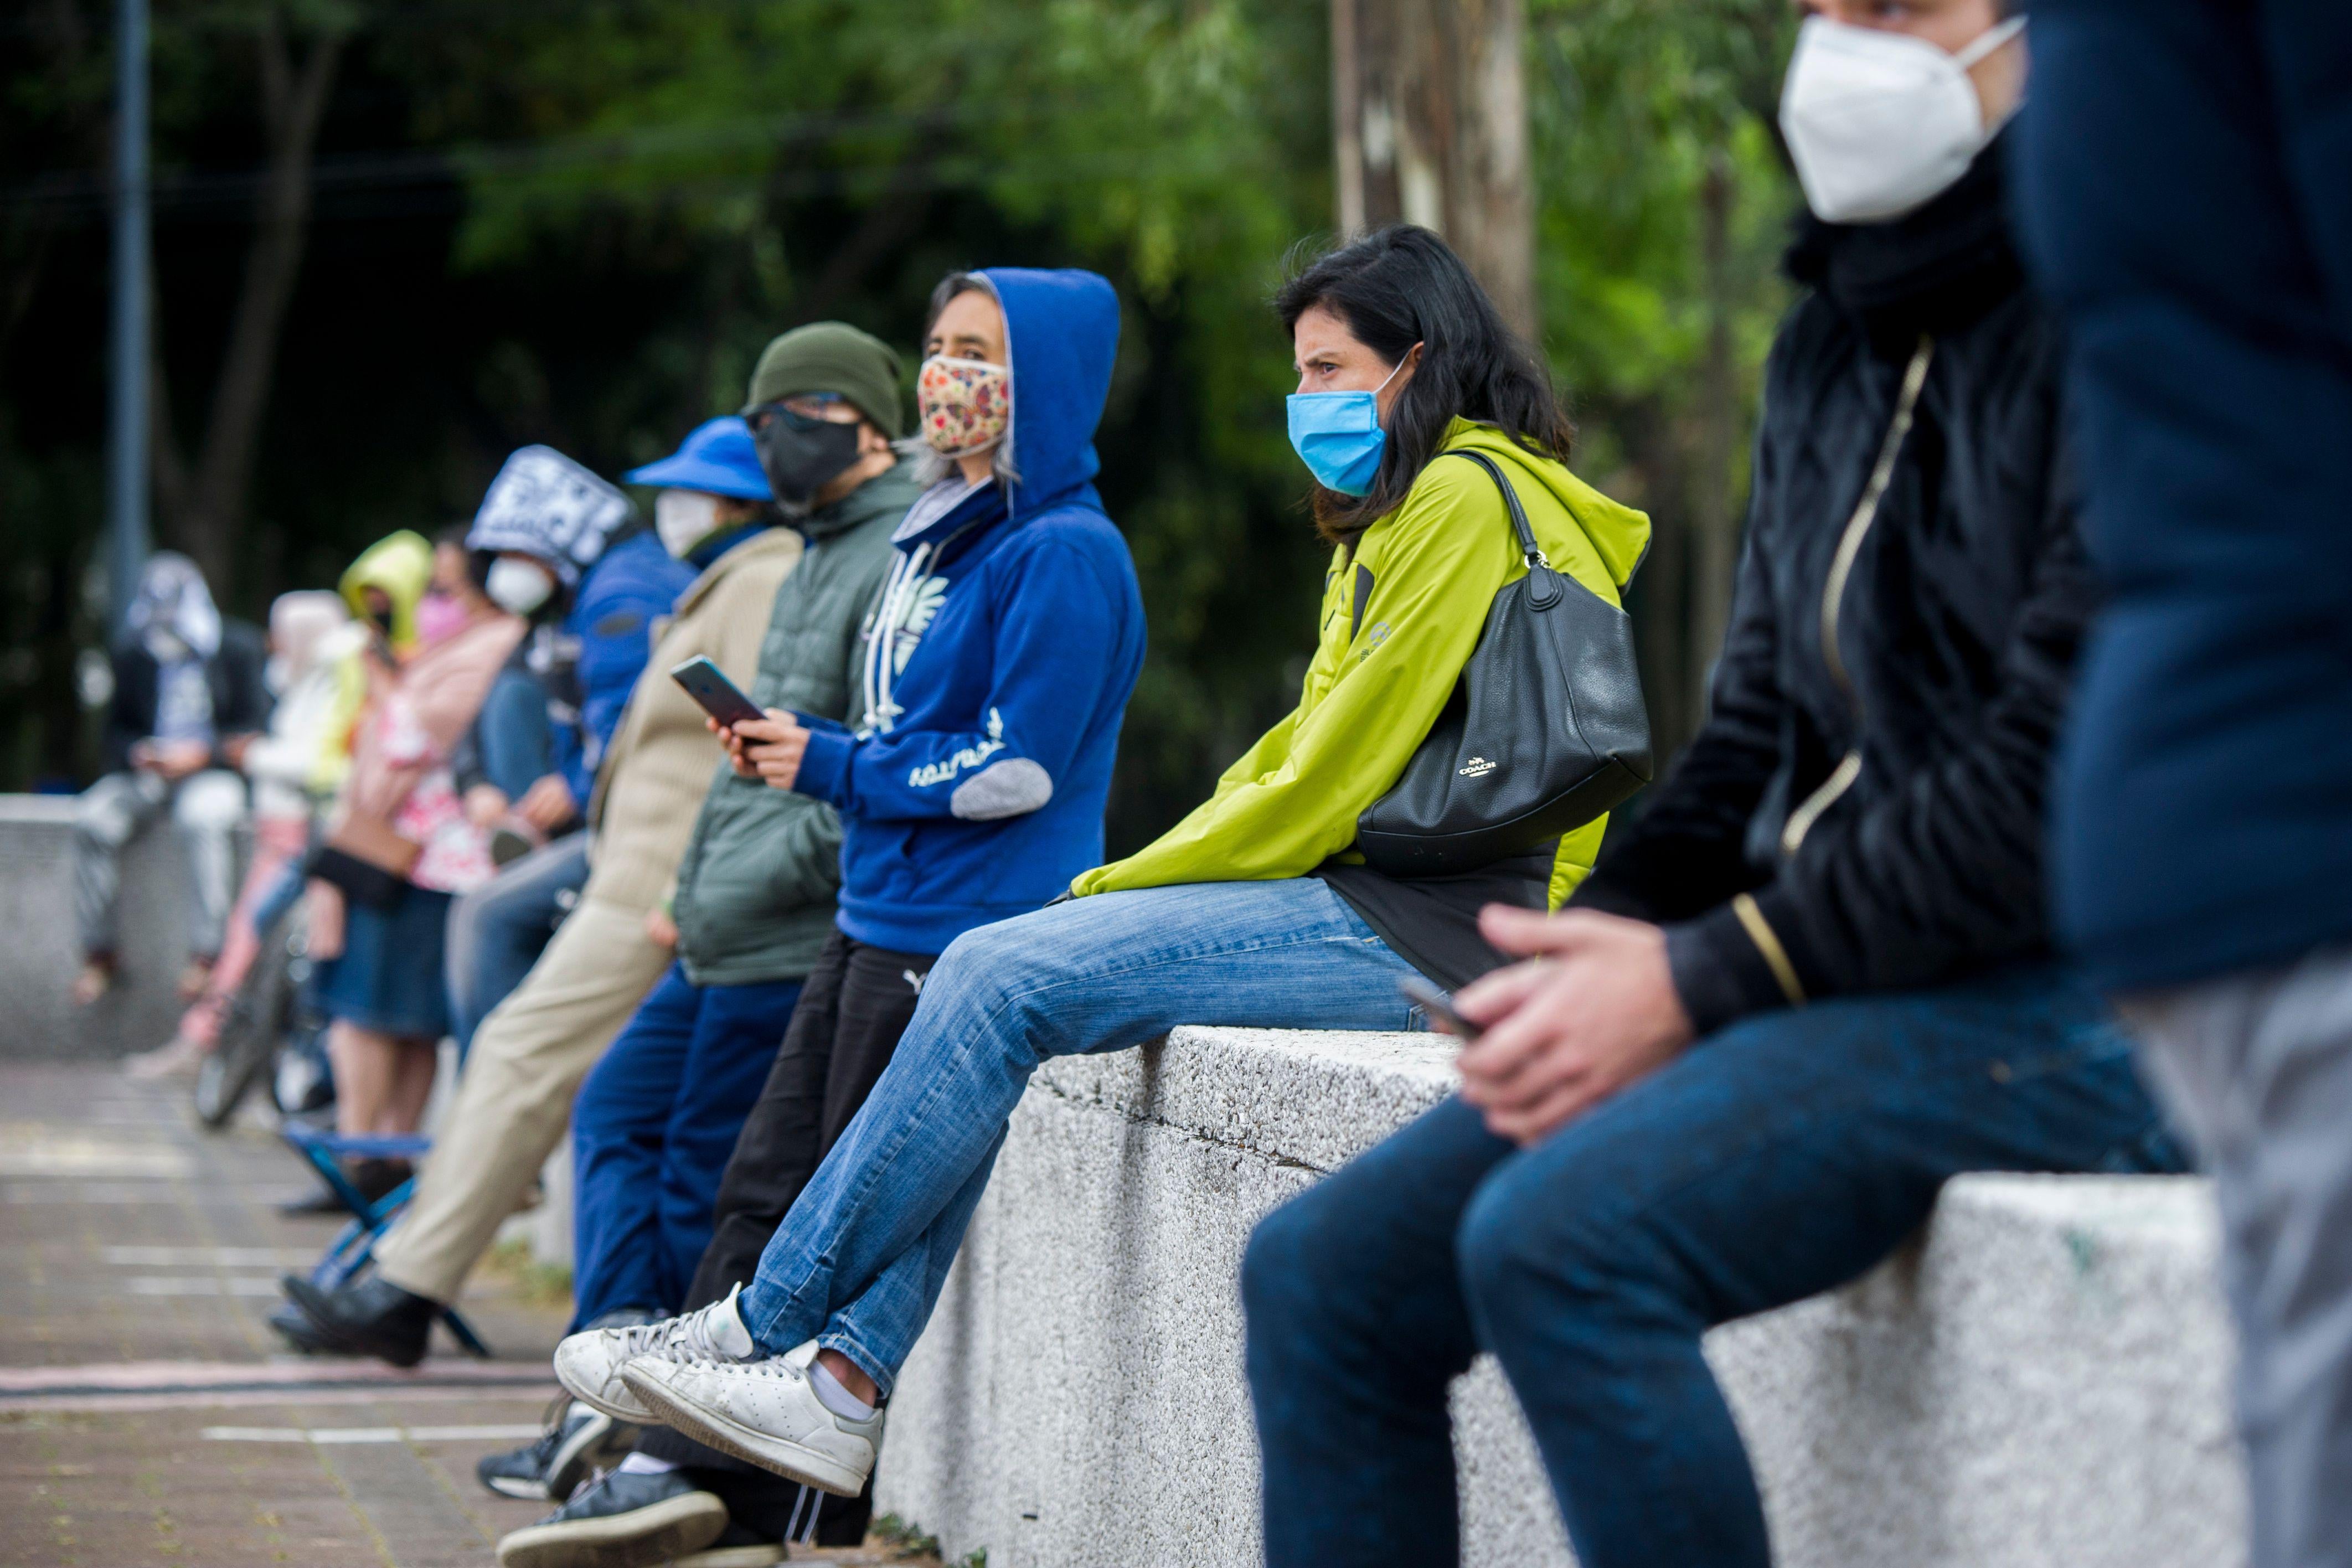 People wearing masks sit on a low wall.